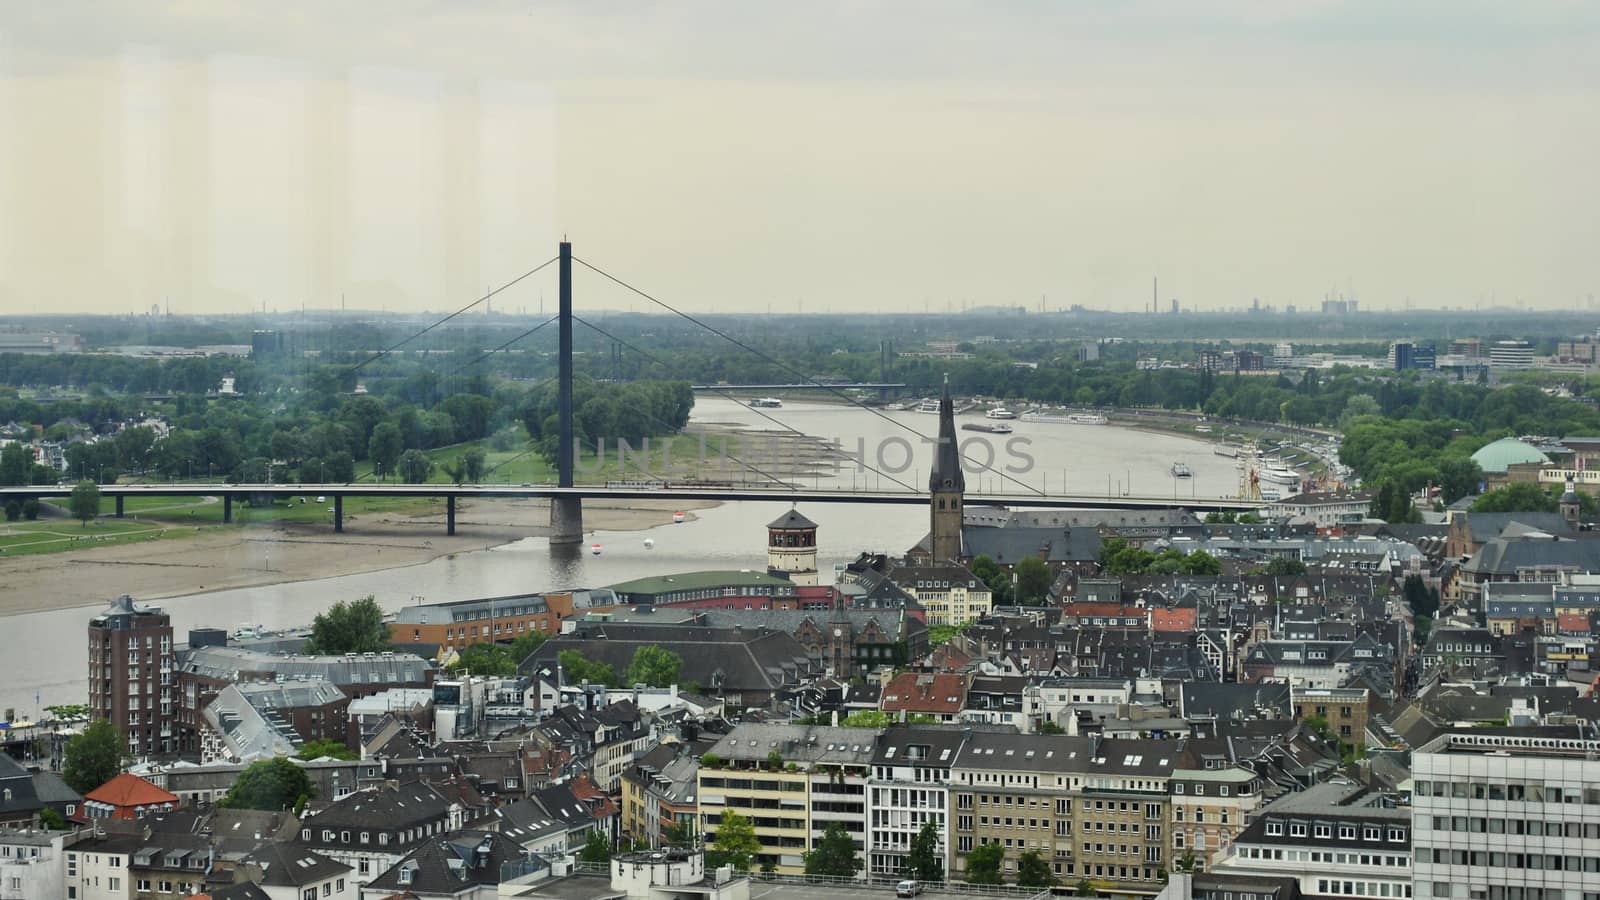 View of the bridge over the river Rhine in Dusseldorf